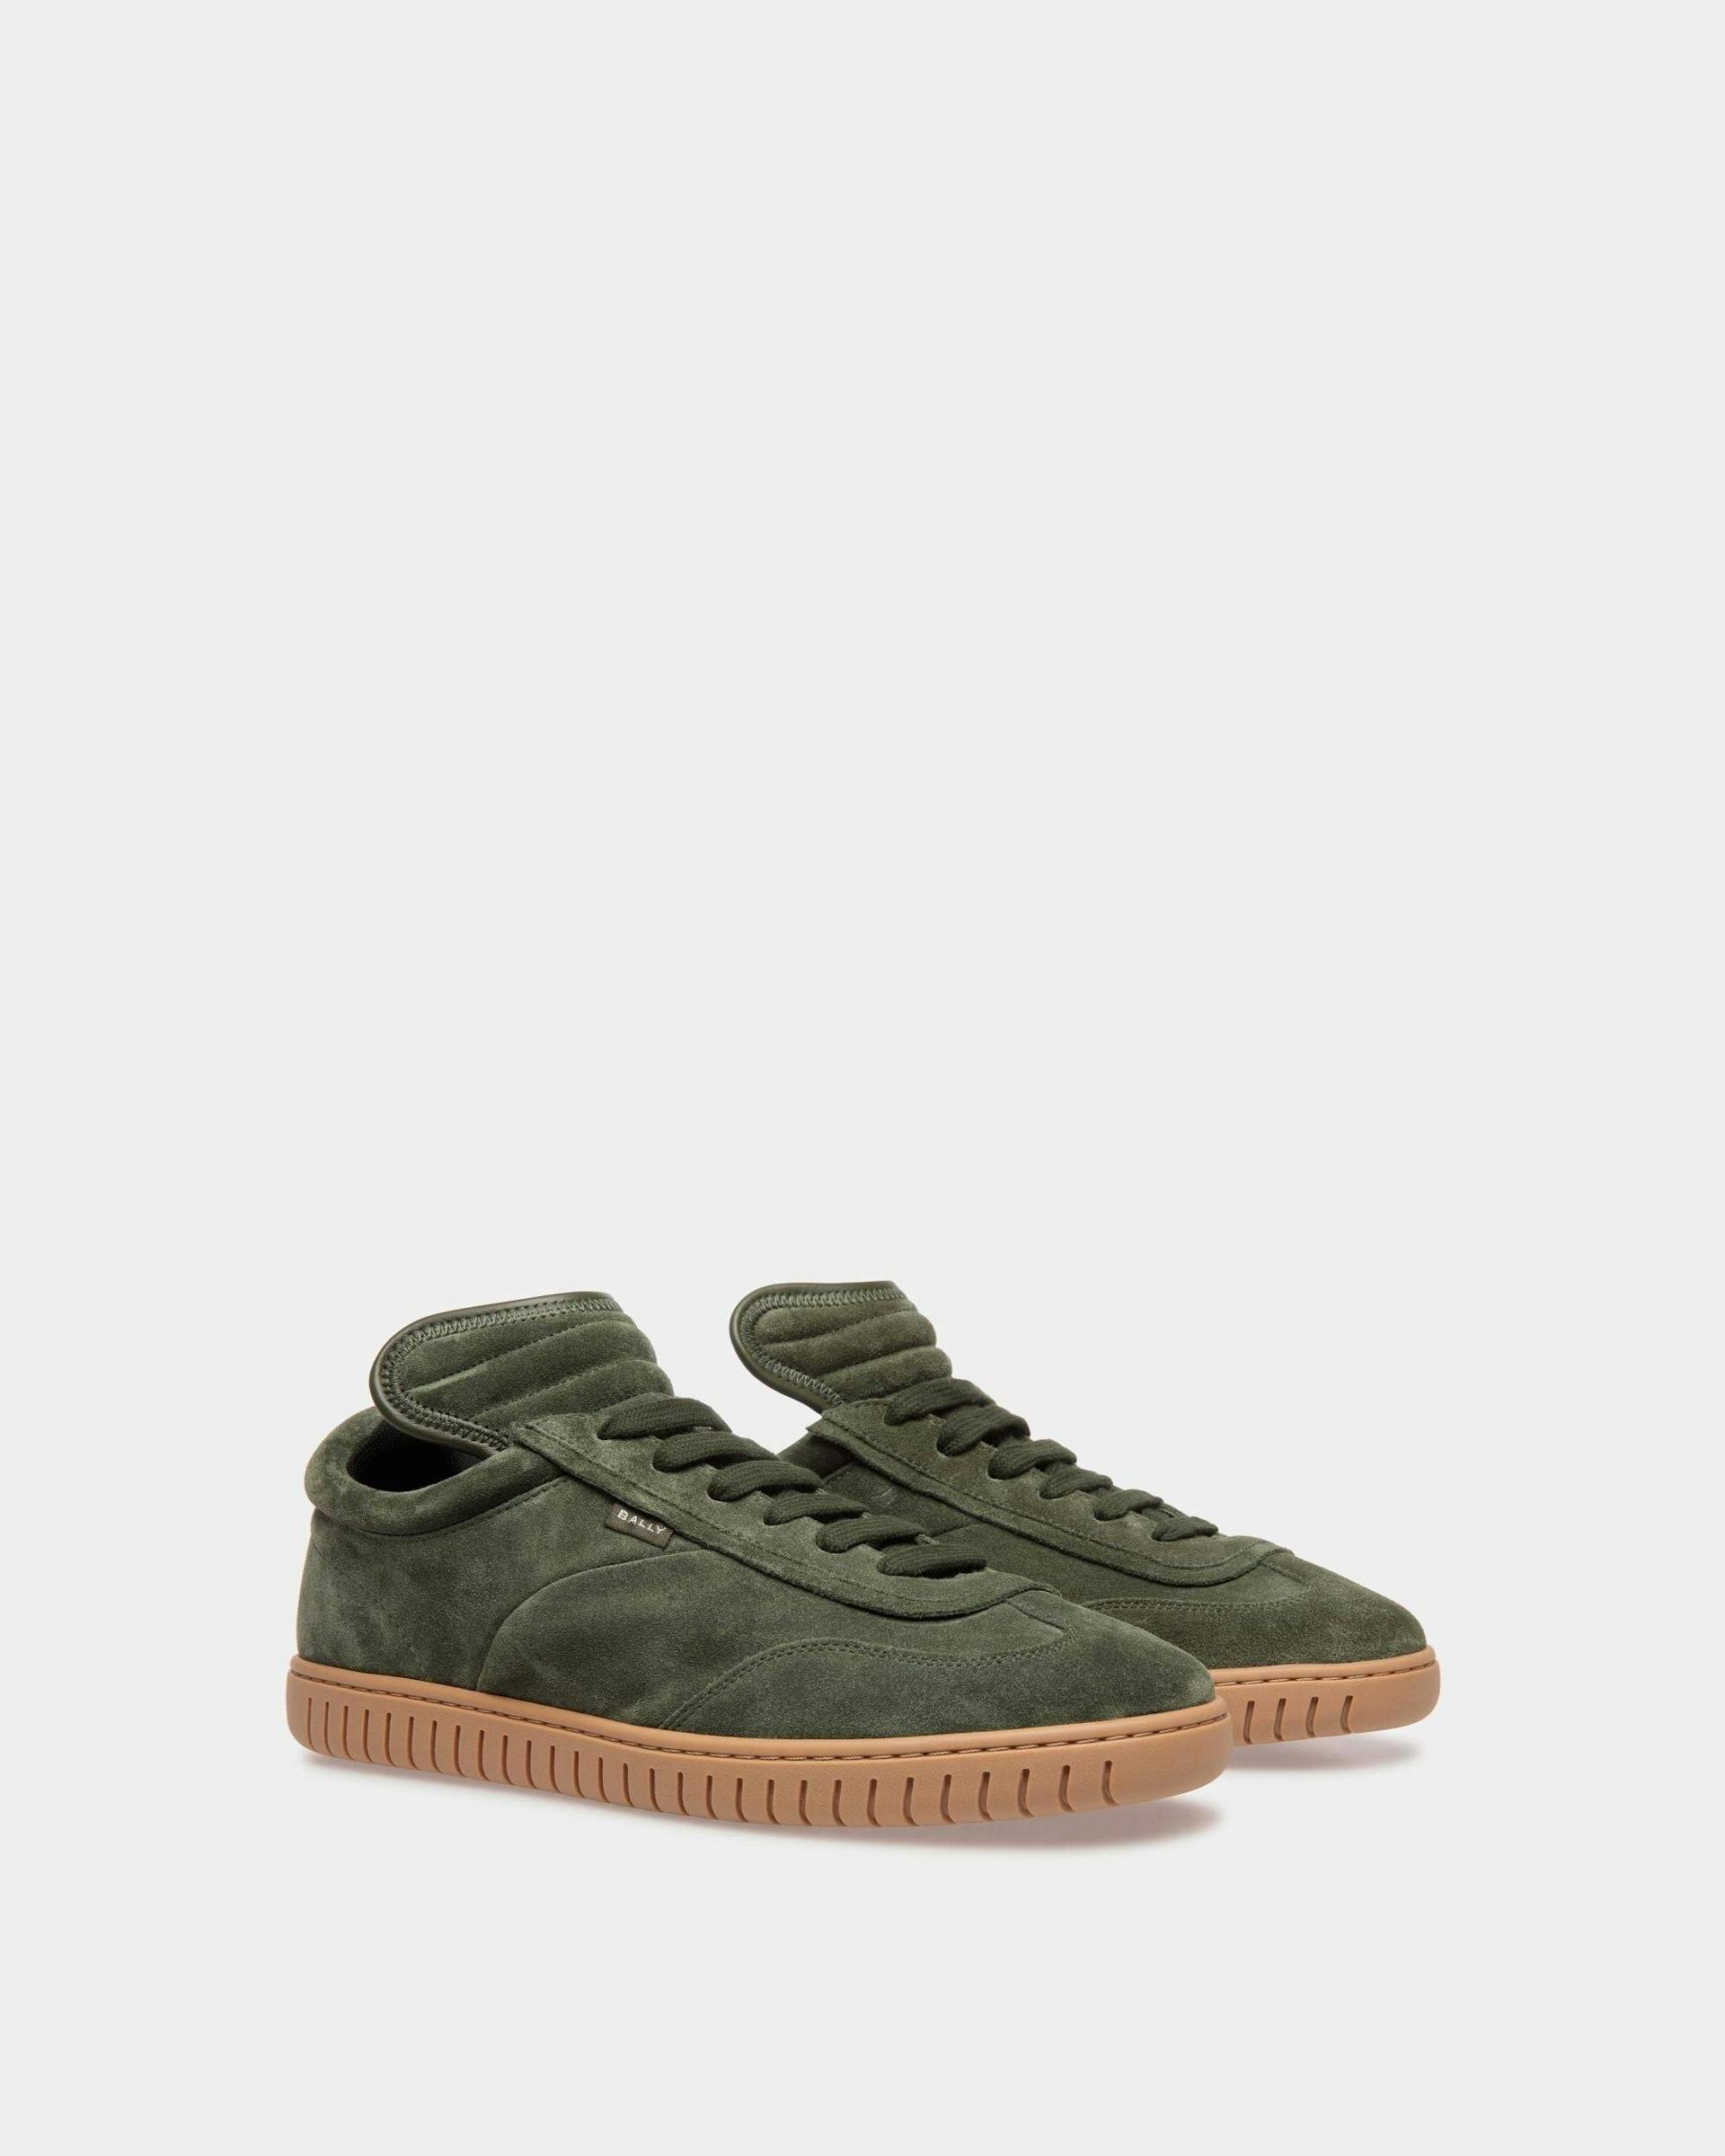 Player Sneakers In Green And Amber Leather - Men's - Bally - 03